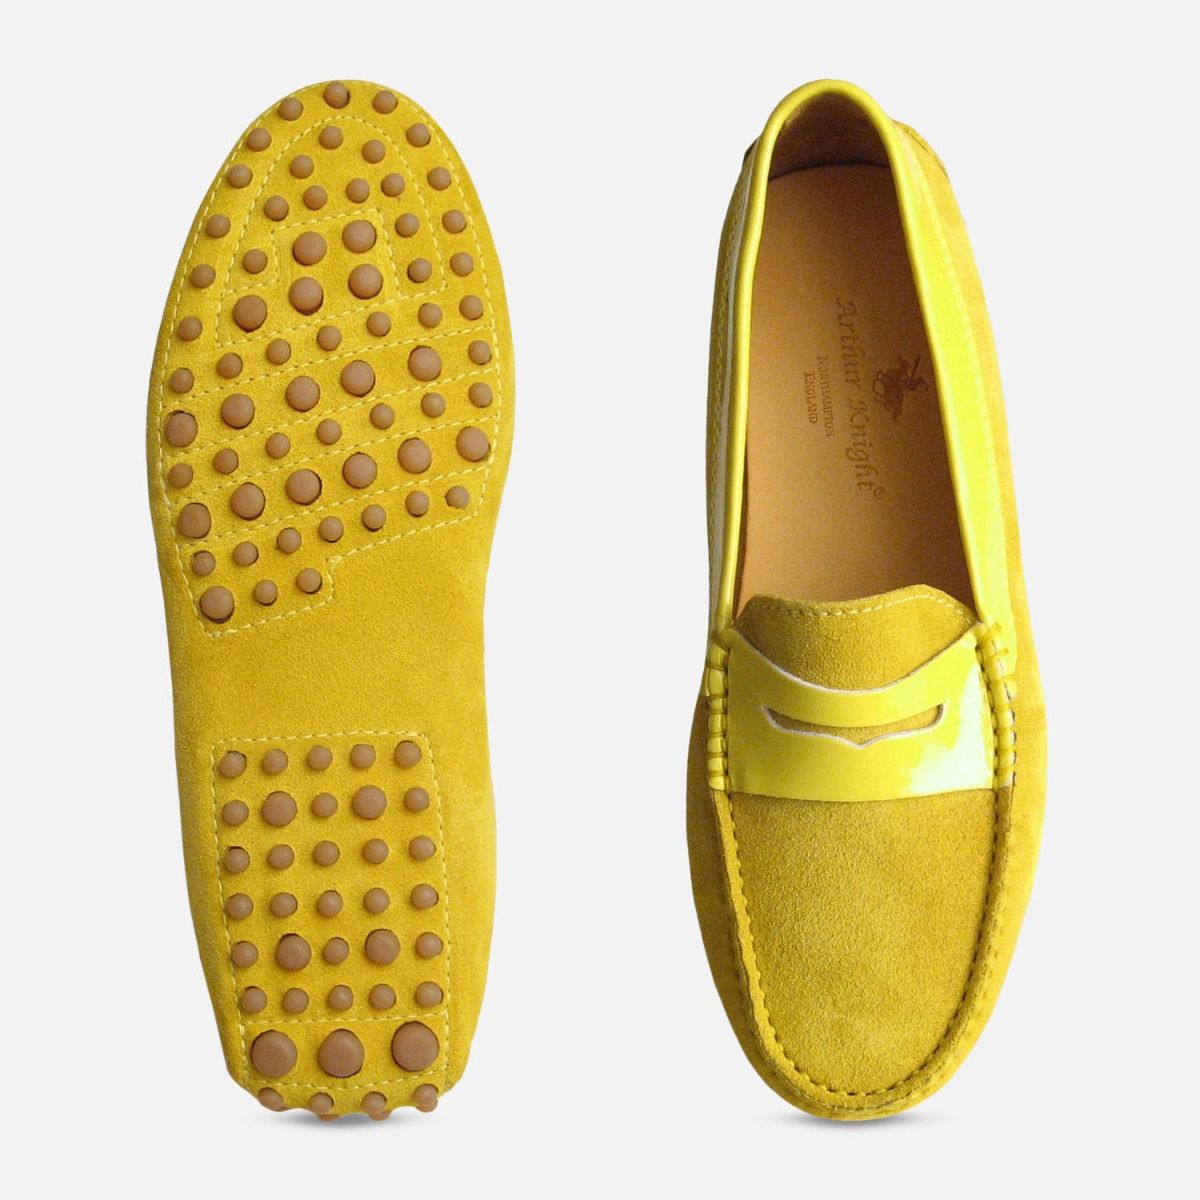 Mustard Yellow Suede \u0026 Patent Leather 